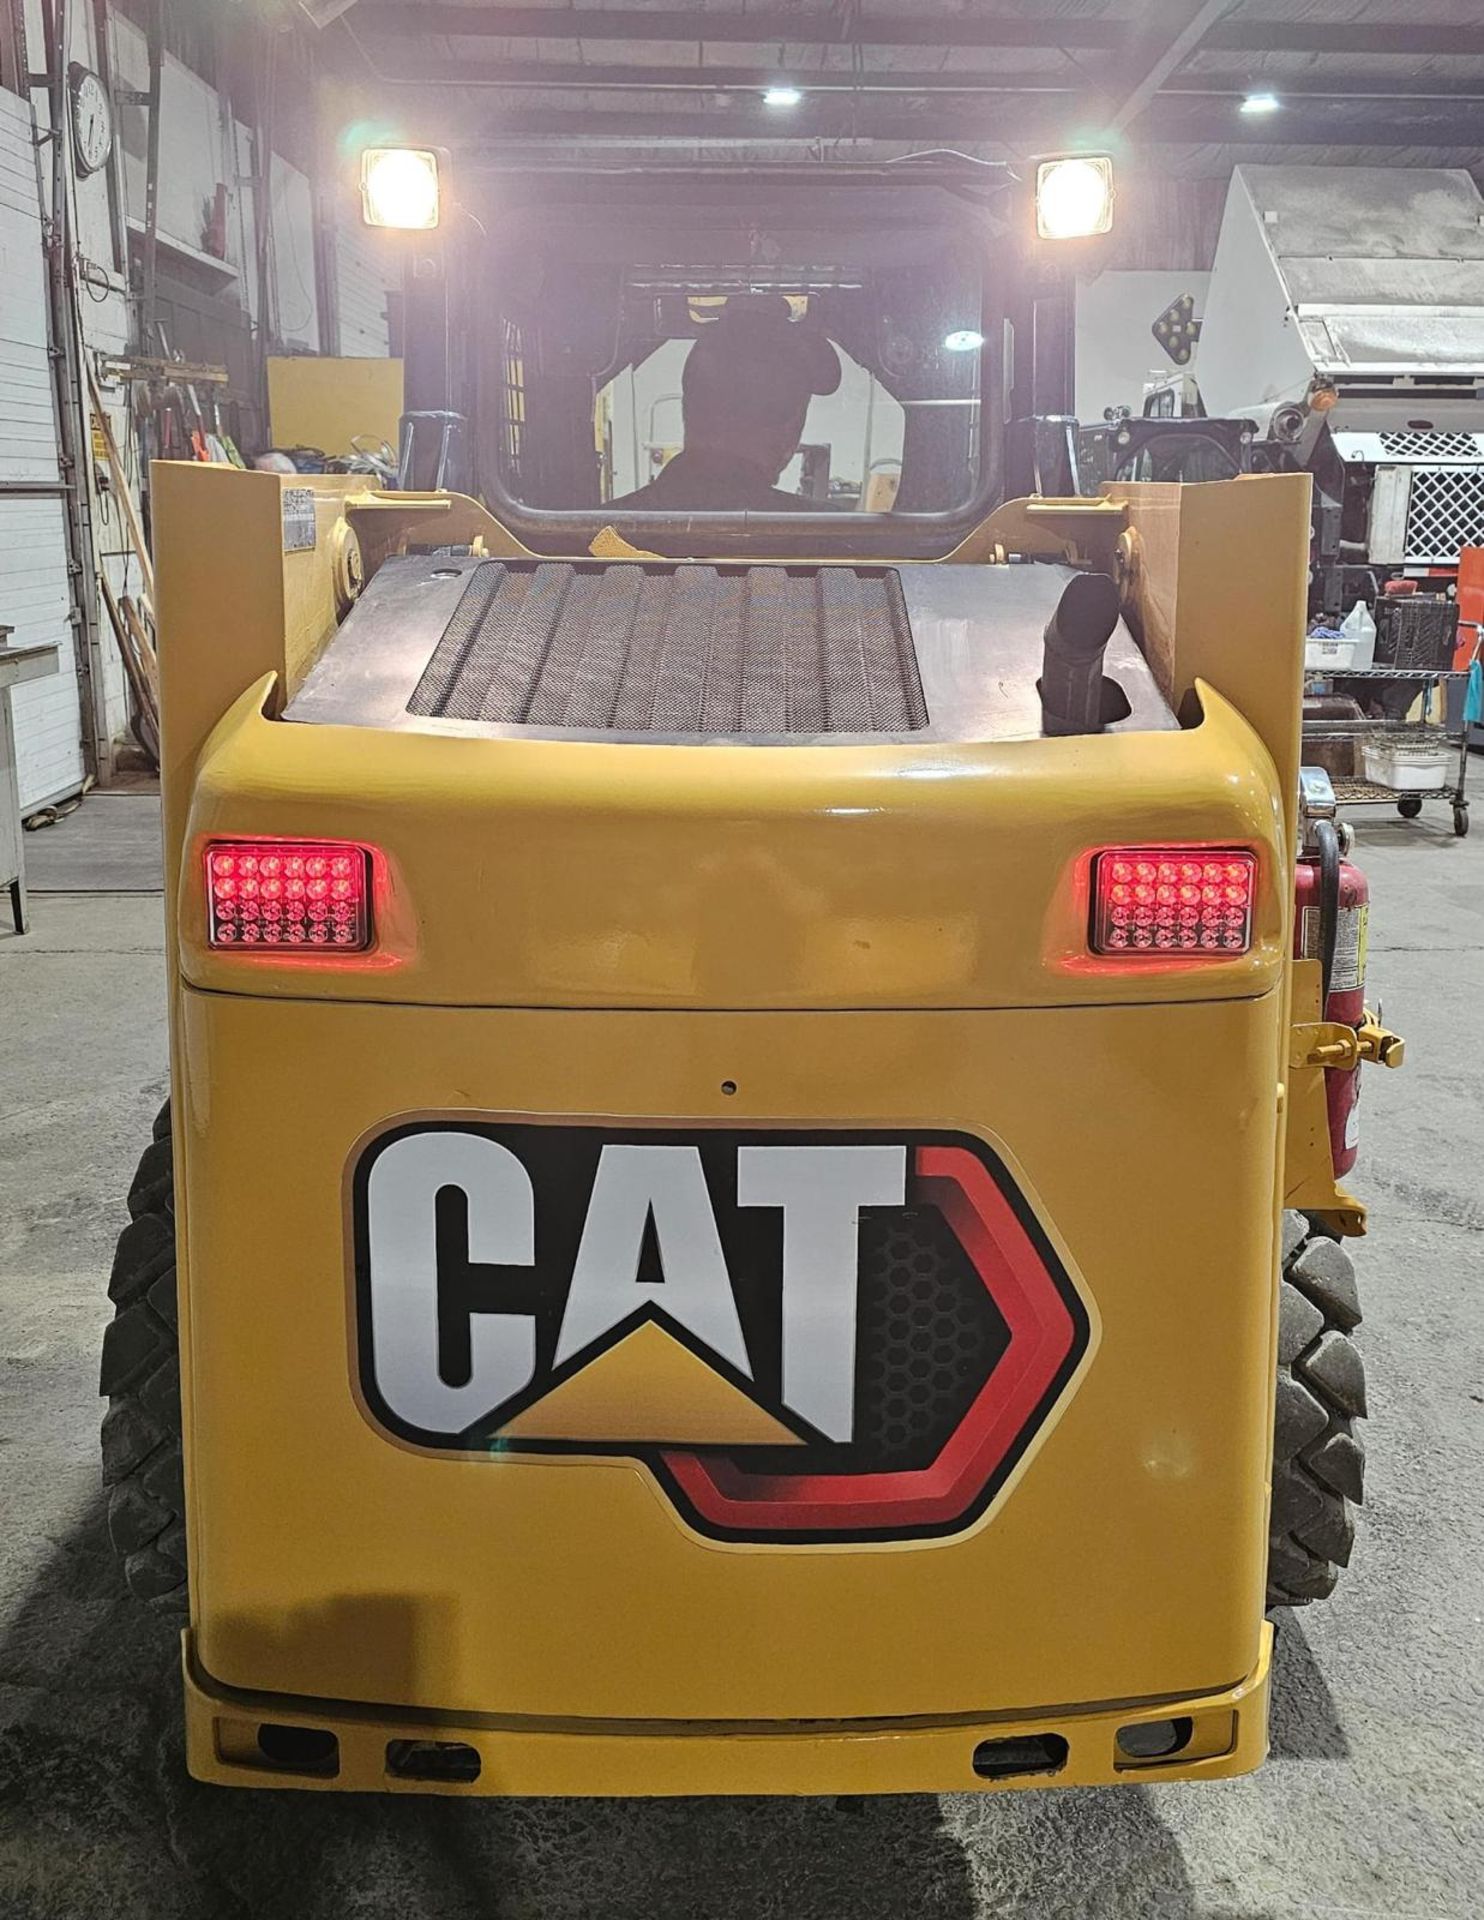 2011 CAT 216B3 SKID STEER LOADER OUTDOOR DIESEL with fully enclosed with heating - Image 9 of 9